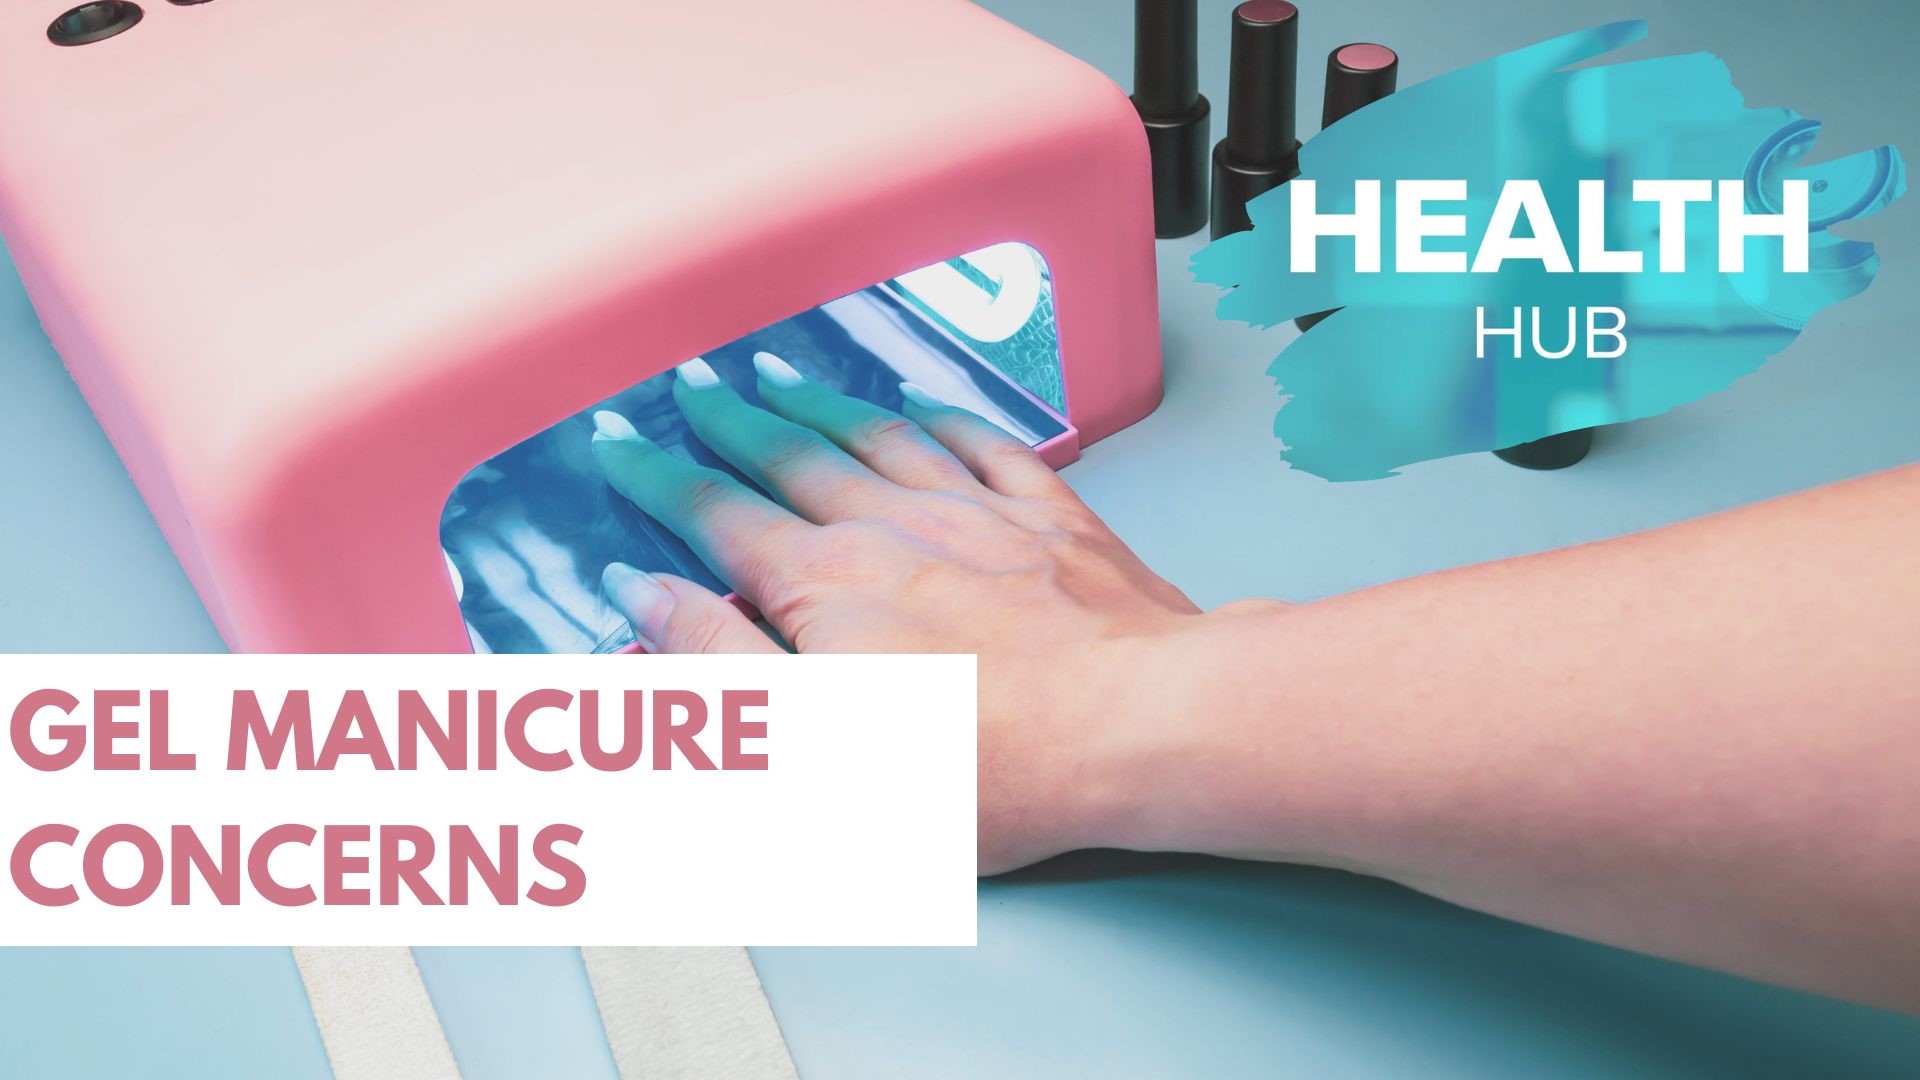 A new study found that the UV lights used during gel manicures can change DNA and lead to cancer. A deeper dive into the study and what you need to know.